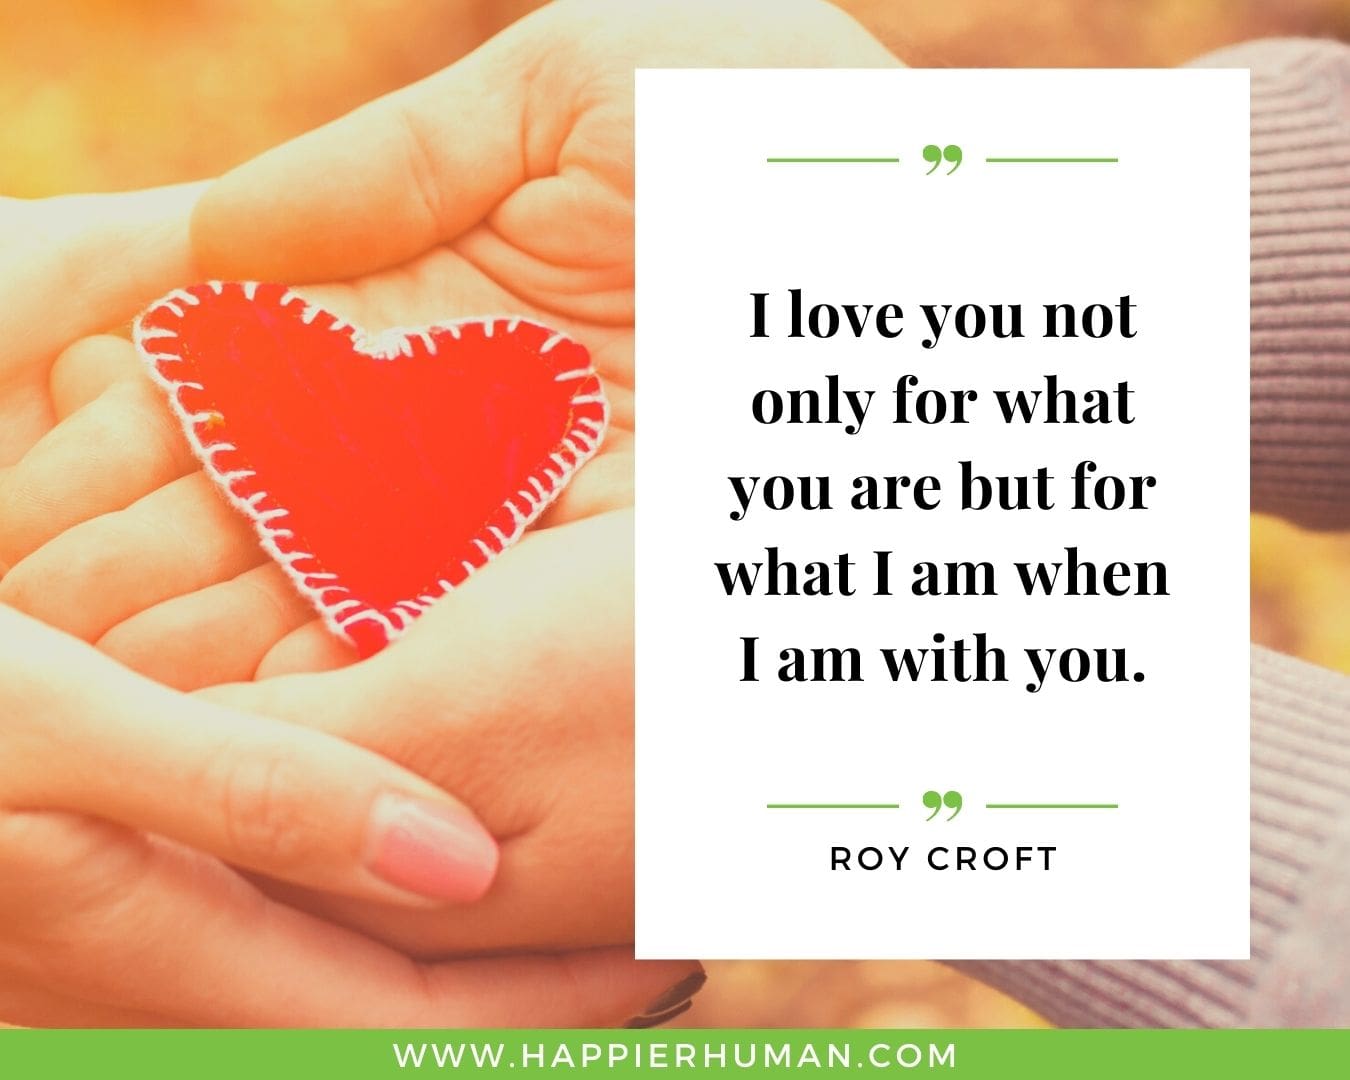 I Love You Quotes for Her - “I love you not only for what you are but for what I am when I am with you.” – Roy Croft